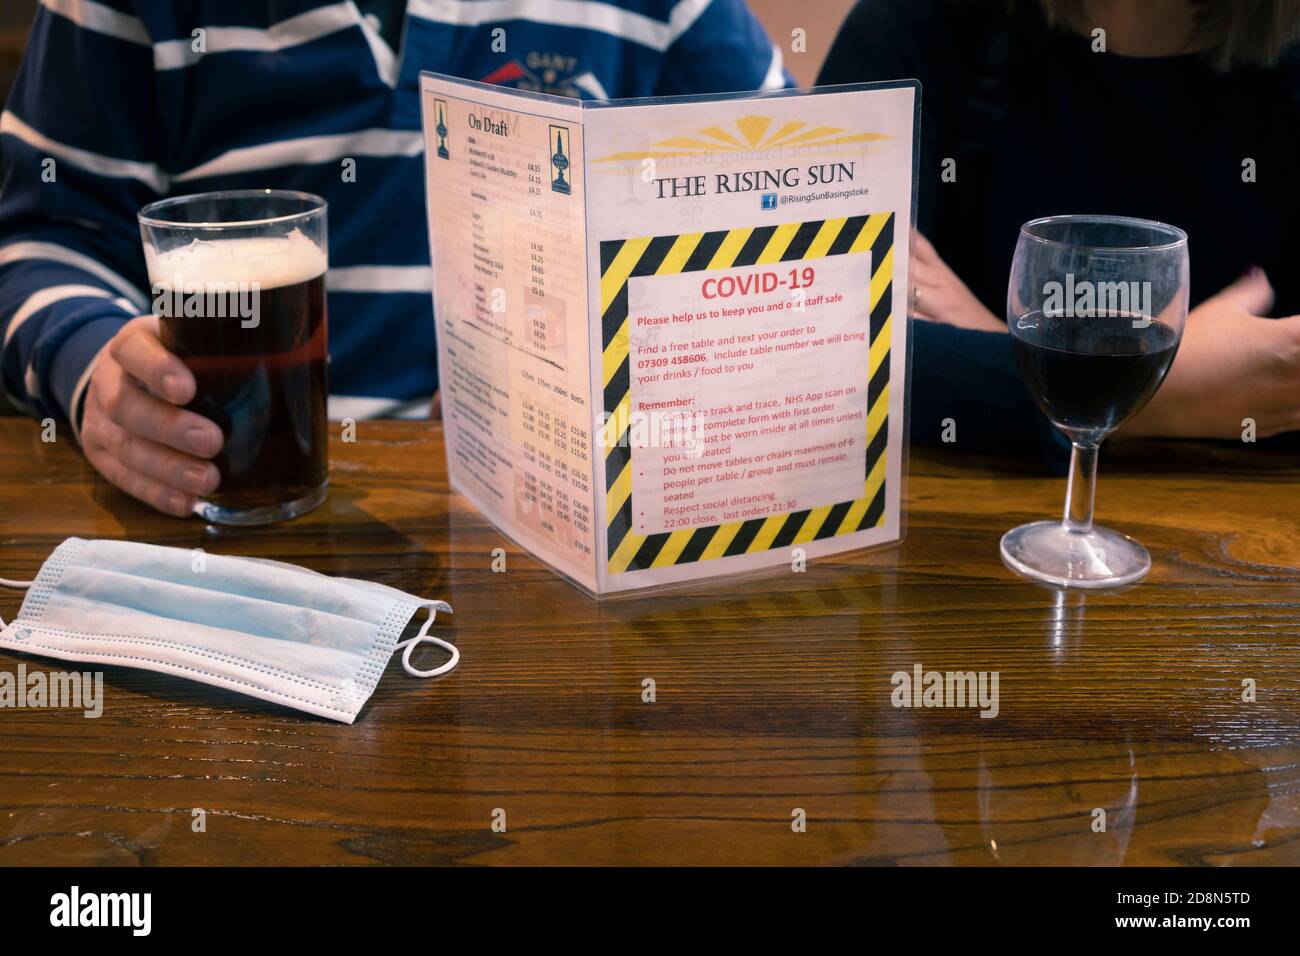 A man and a woman drinking in a pub with Covid-19 Coronavirus rules and restrictions on the table and a disposable face mask. Basingstoke, UK Stock Photo